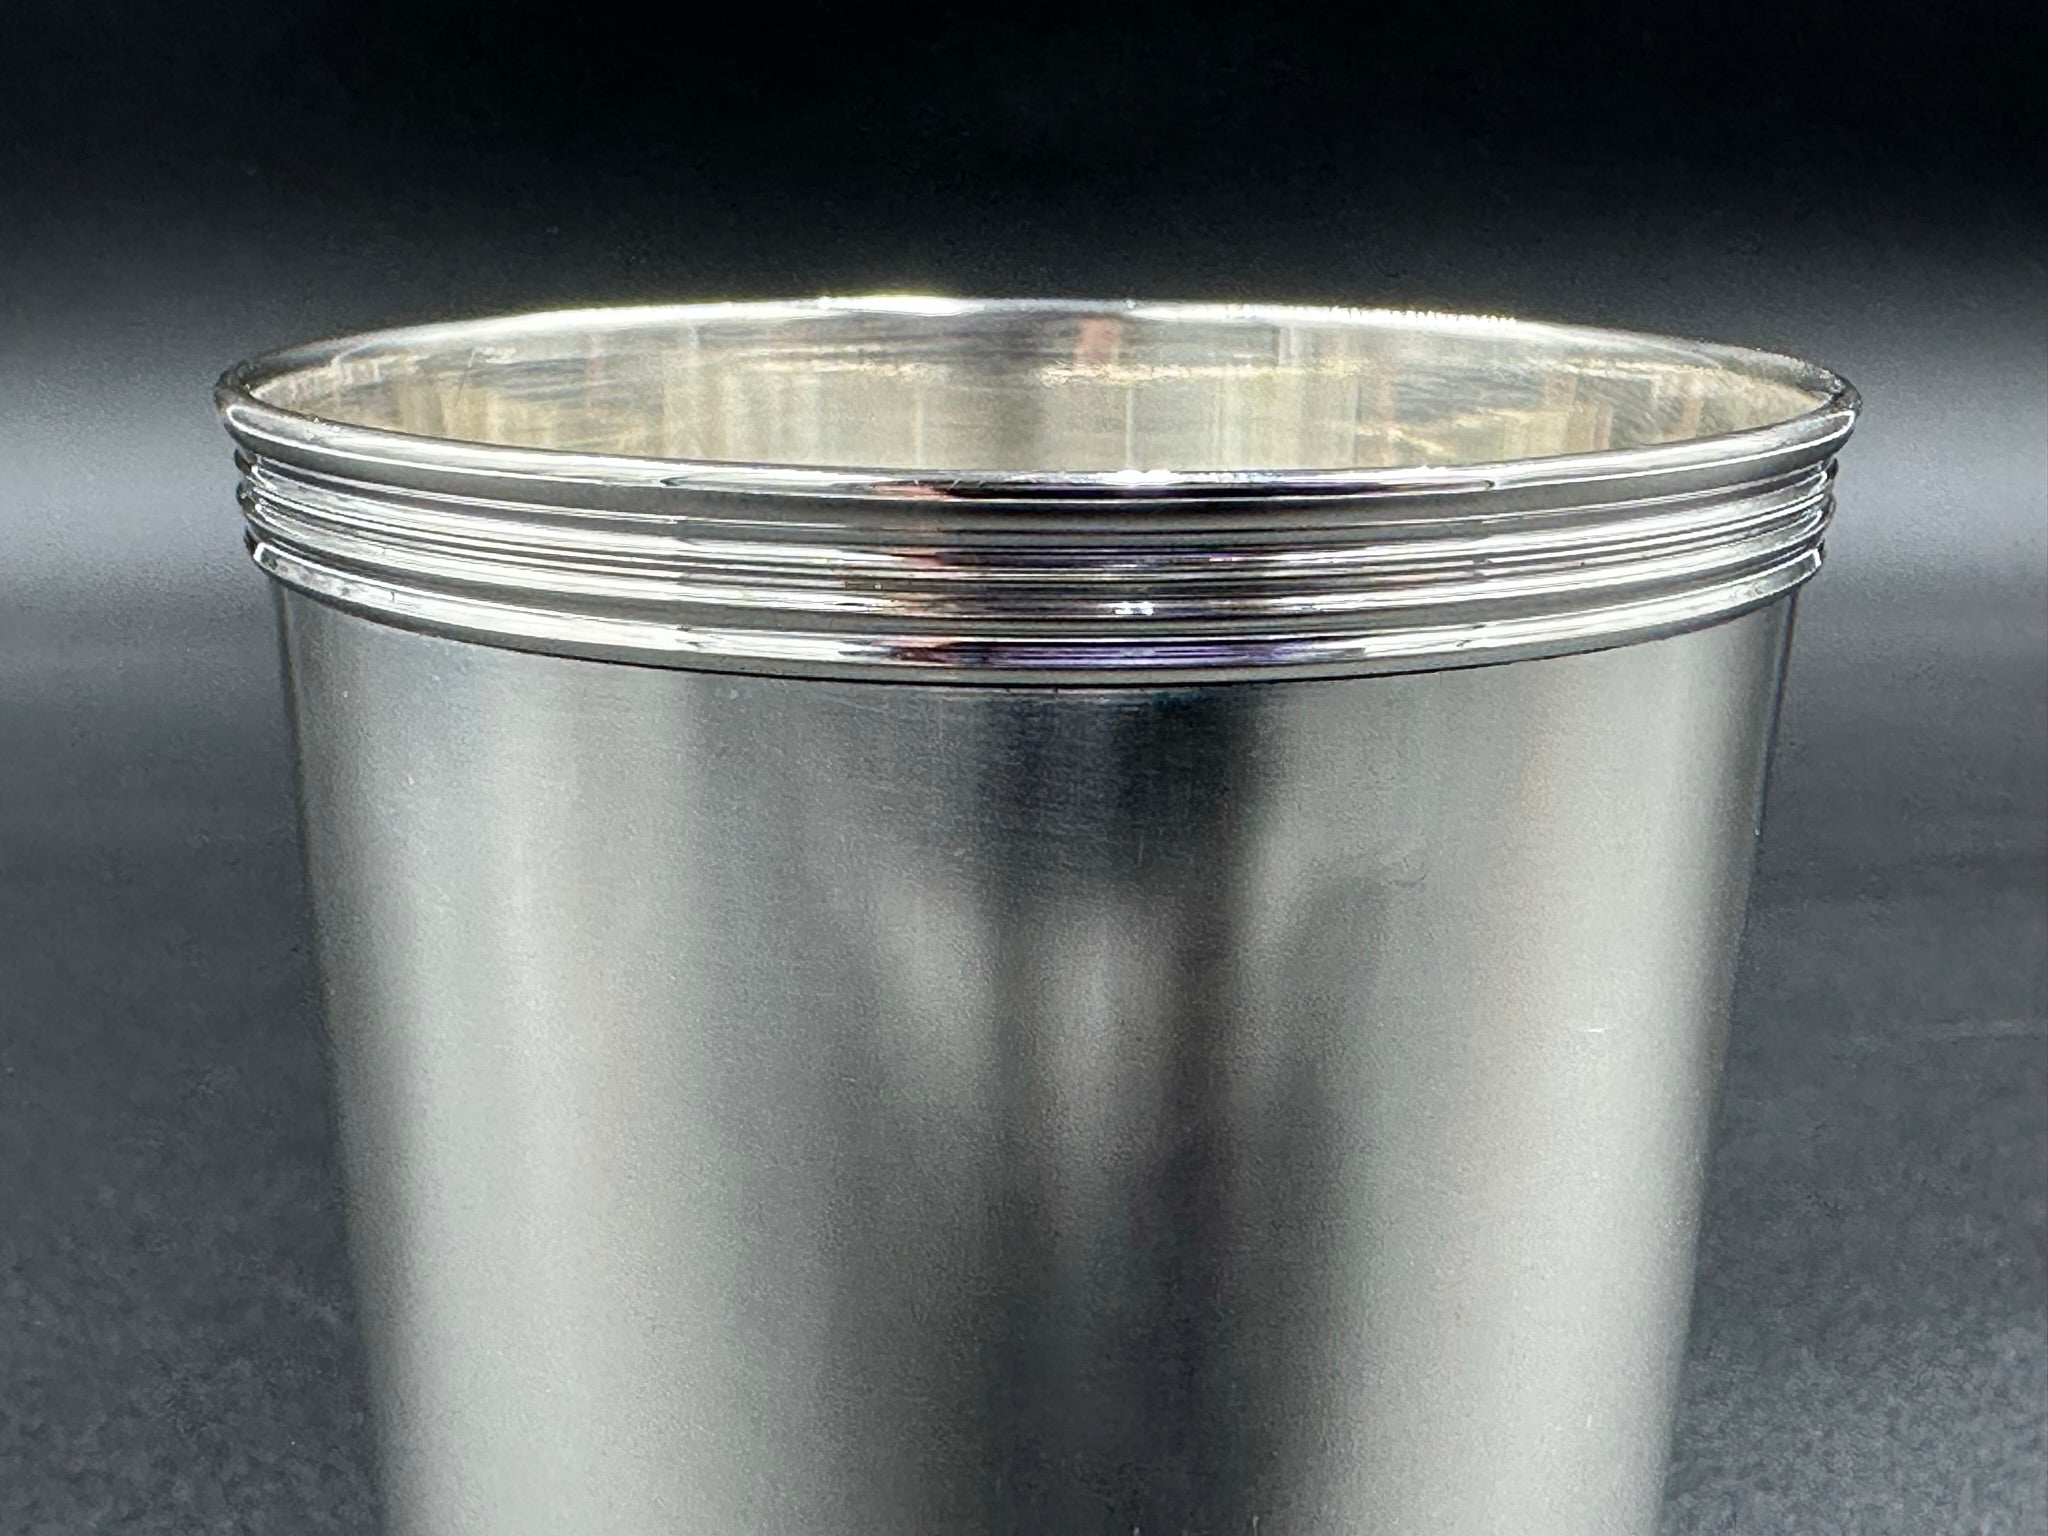 Lot - Three American Sterling Silver Julep Cups 'Jaccard Replica of 1850, Saint  Louis', 1946, H 4 in. (10.2 cm.), Combined 14.5 ozt